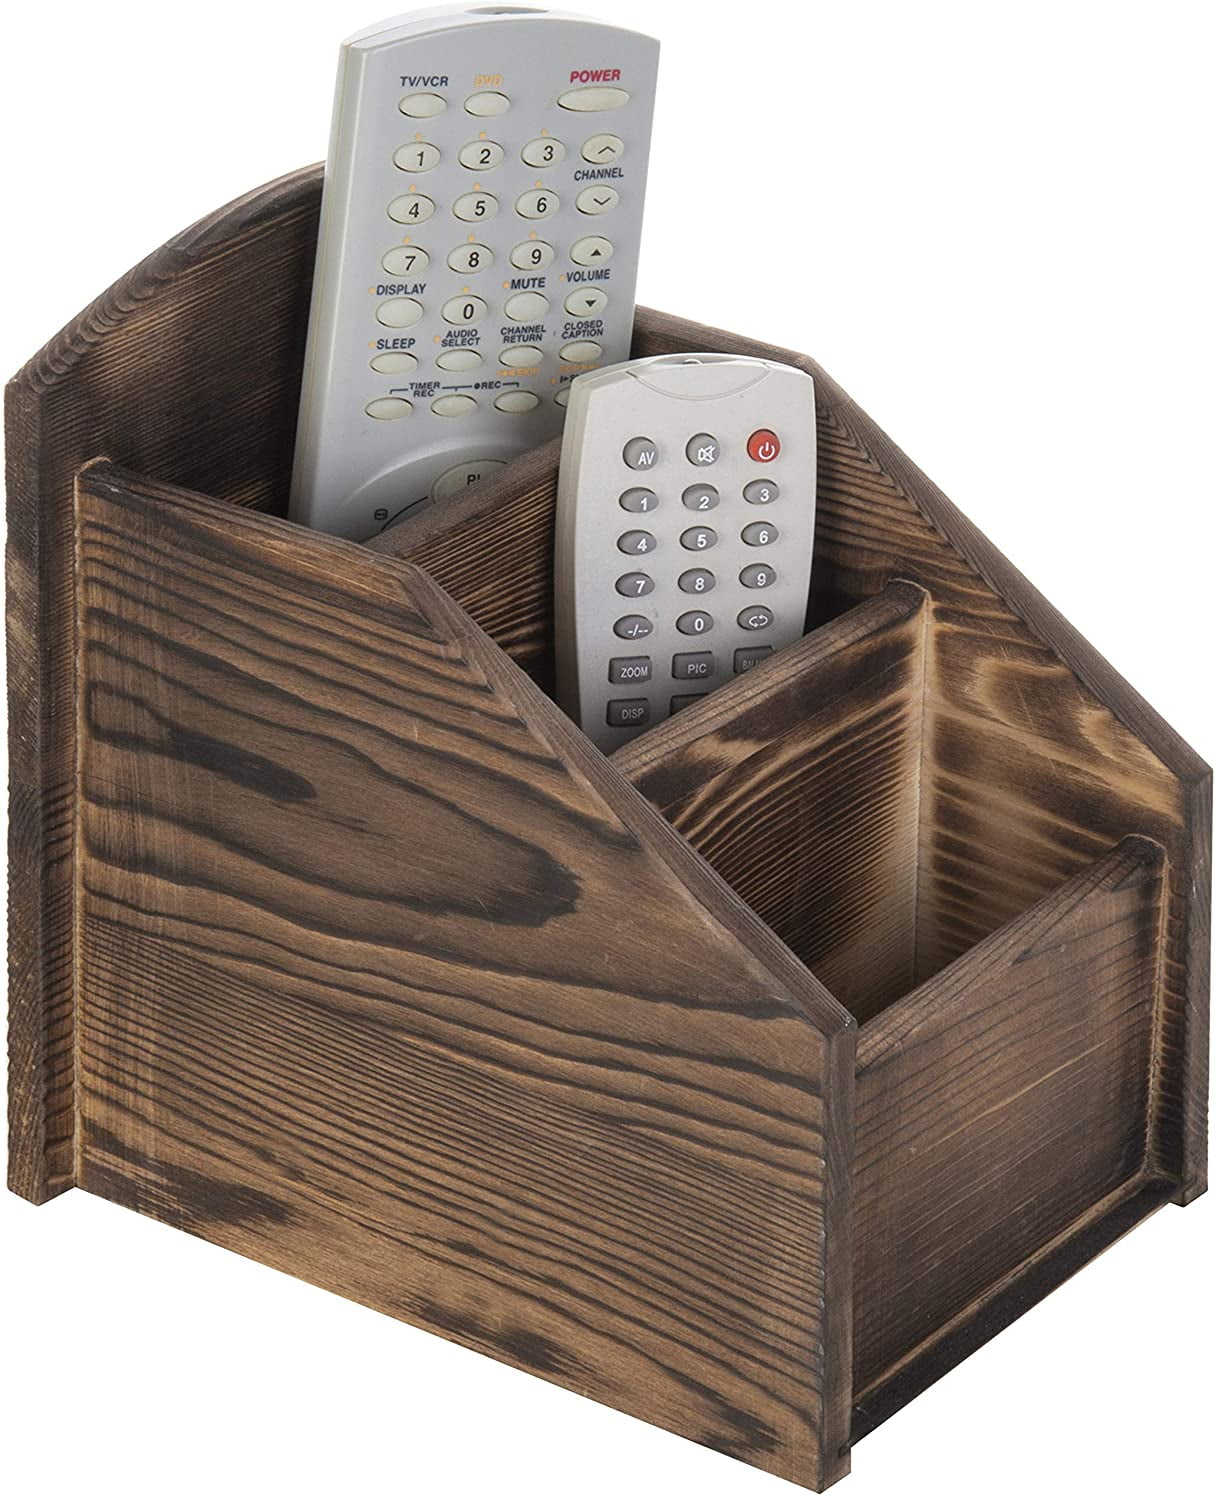 MyGift 5-Slot Rustic Torched Wood Remote Control Storage Caddy 